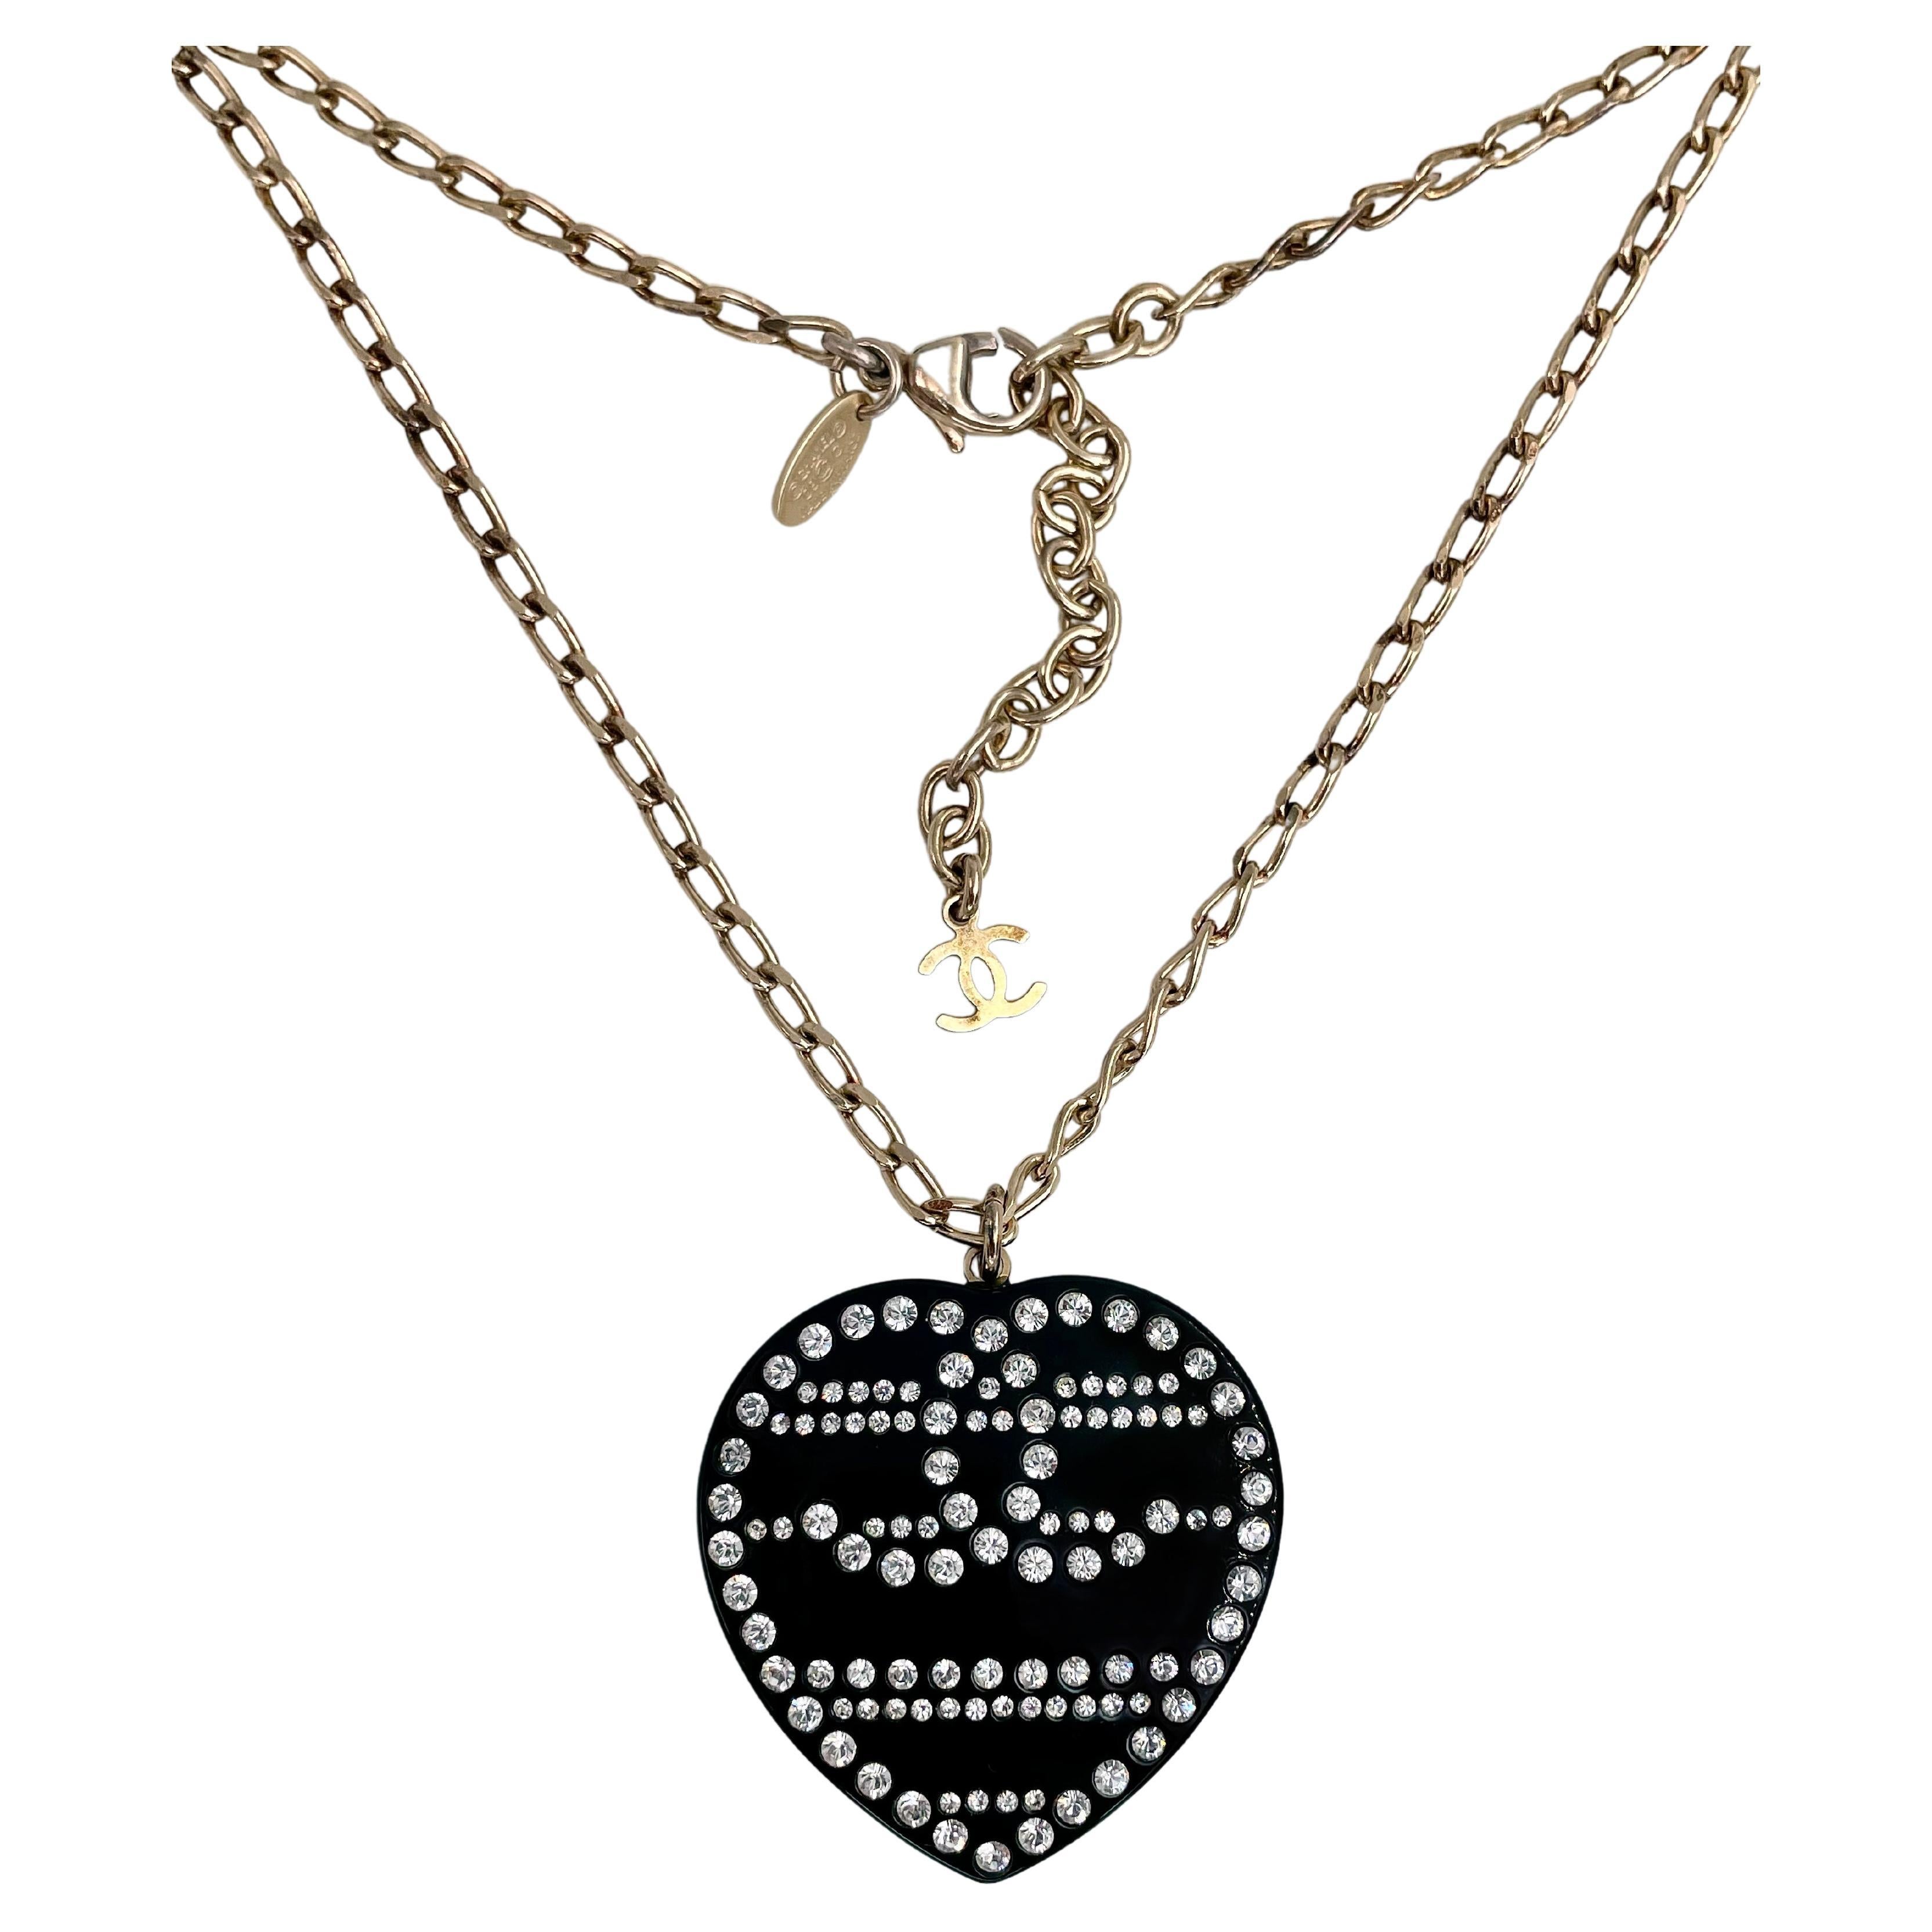 Chanel Black Heart Necklace - 18 For Sale on 1stDibs